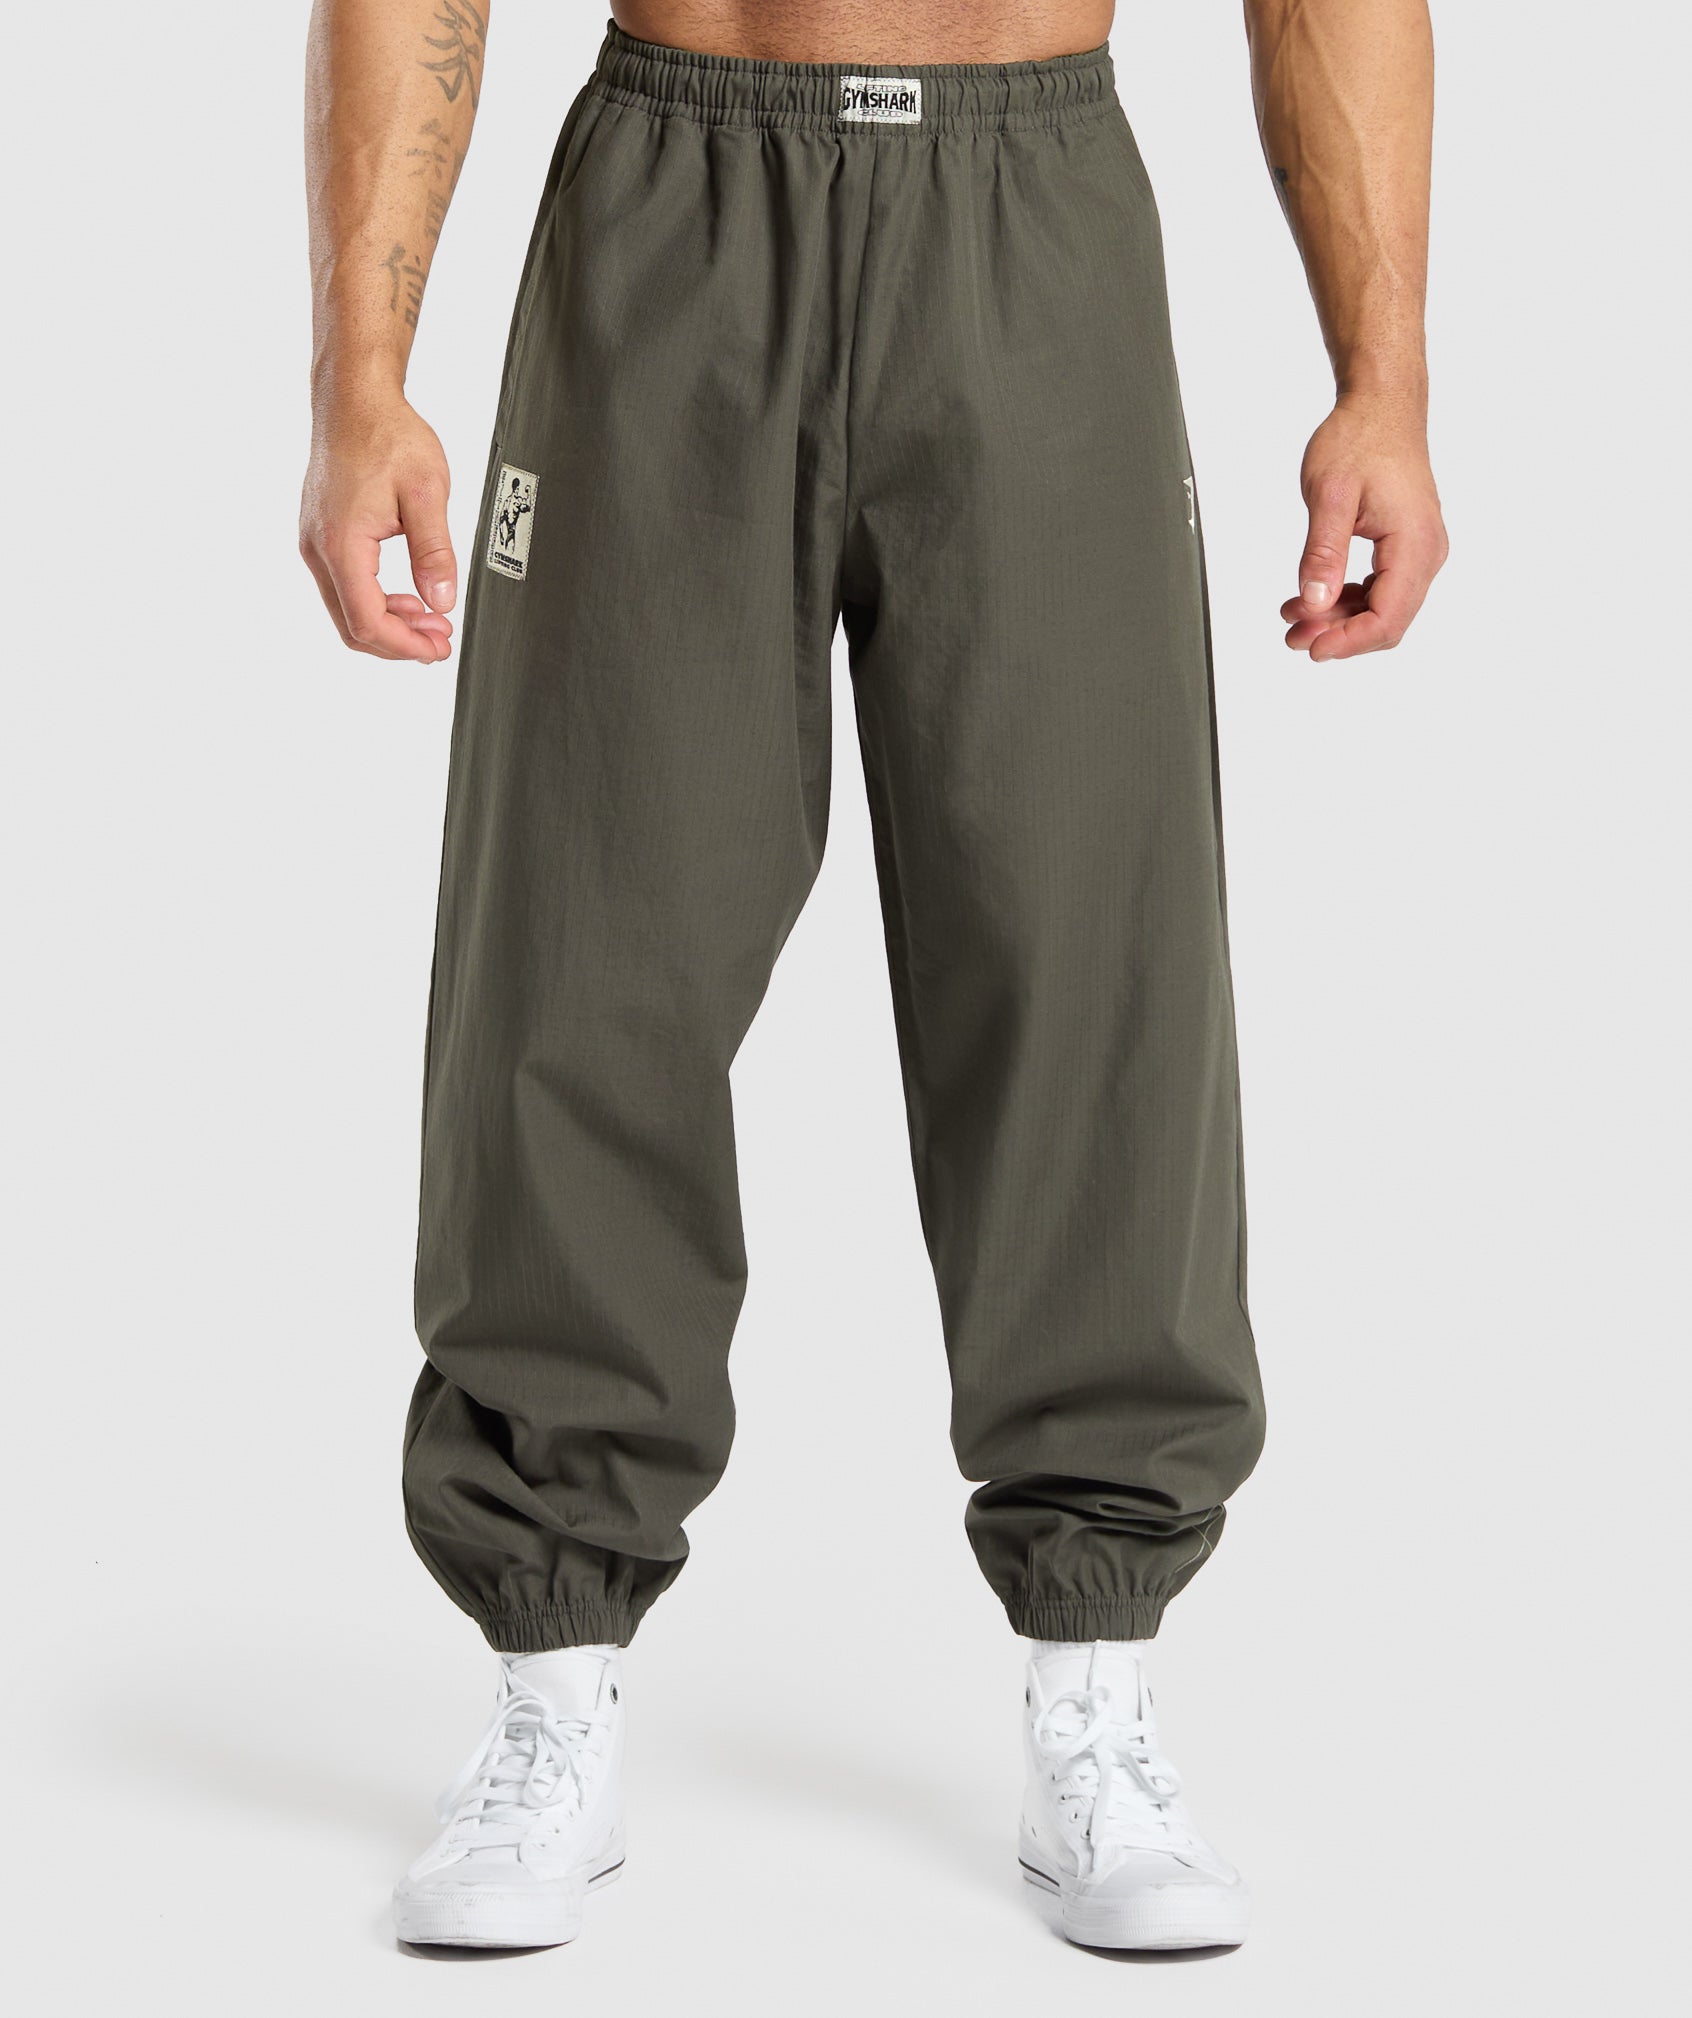 Pumper Pants in {{variantColor} is out of stock